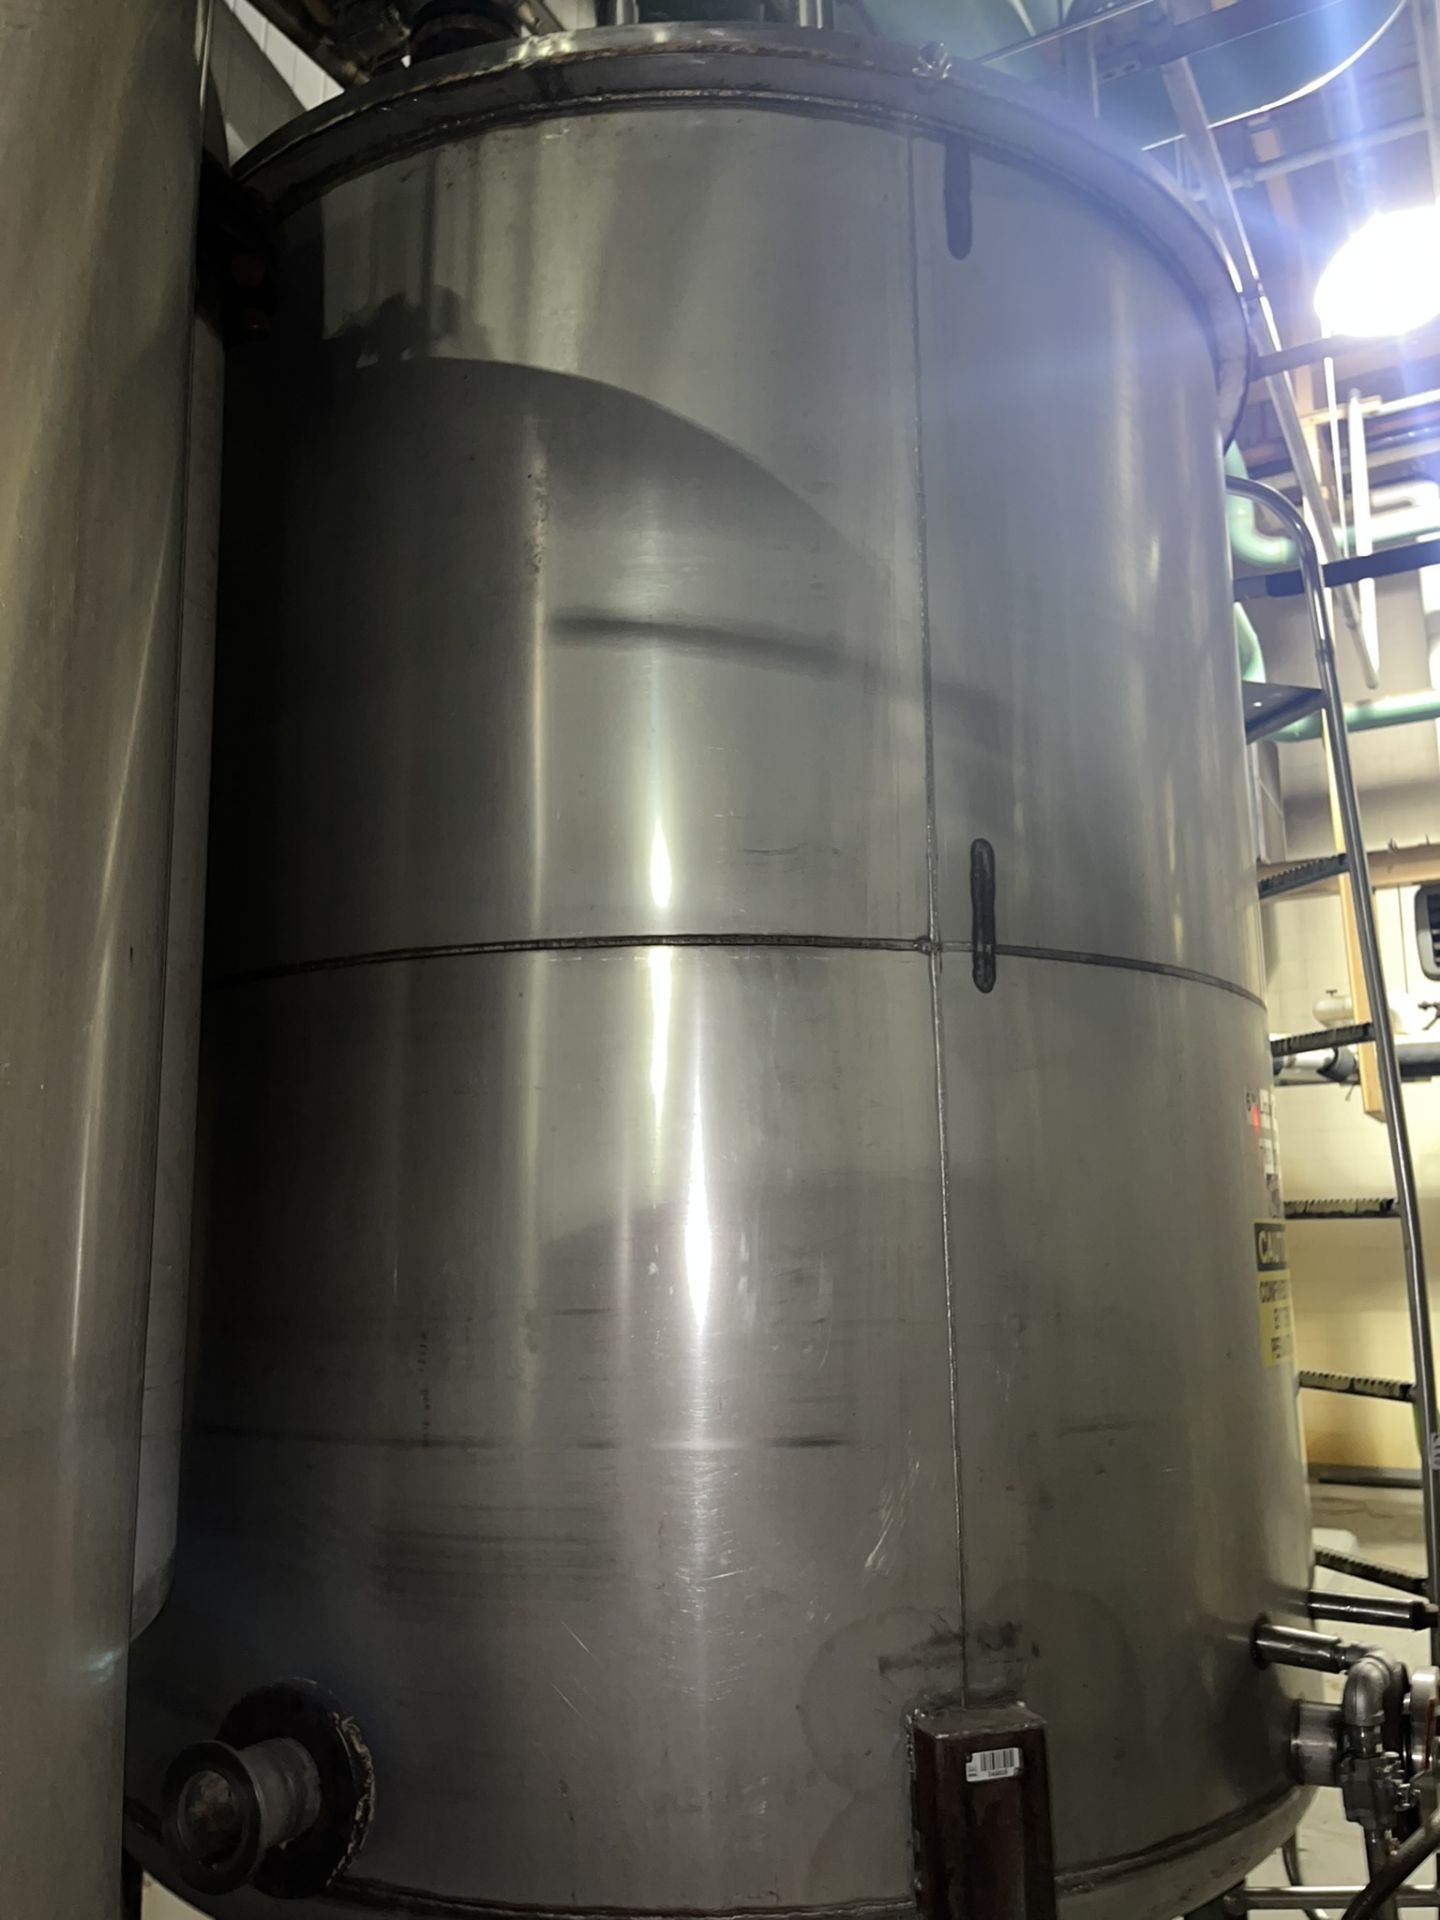 1200 GALLON STAINLESS STEEL 6% LIQUOR TANK (Located Freehold, NJ) (Simple Loading Fee $4,950) - Image 2 of 3